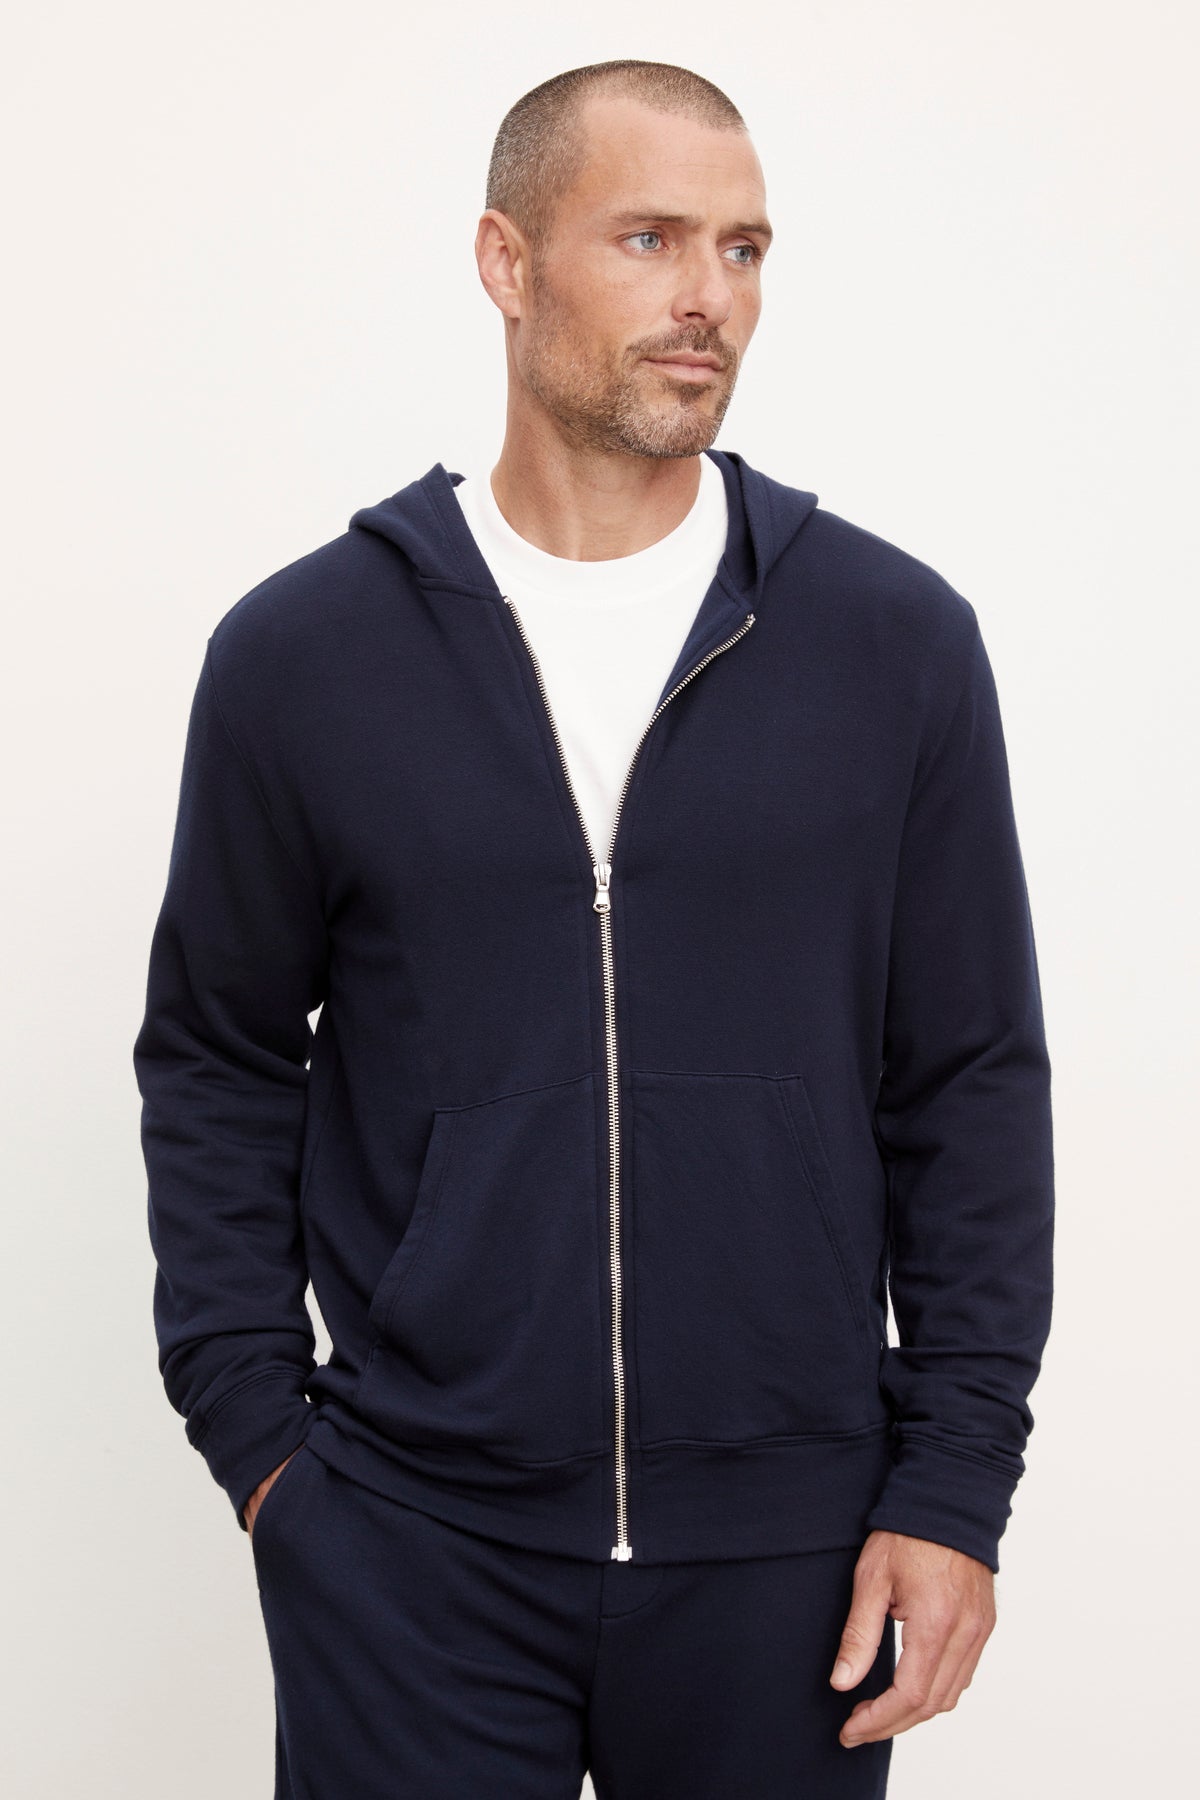   A man wearing a RODAN LUXE FLEECE ZIP HOODIE navy blue hoodie from Velvet by Graham & Spencer over a white t-shirt, standing against a neutral background, looking to his left. 